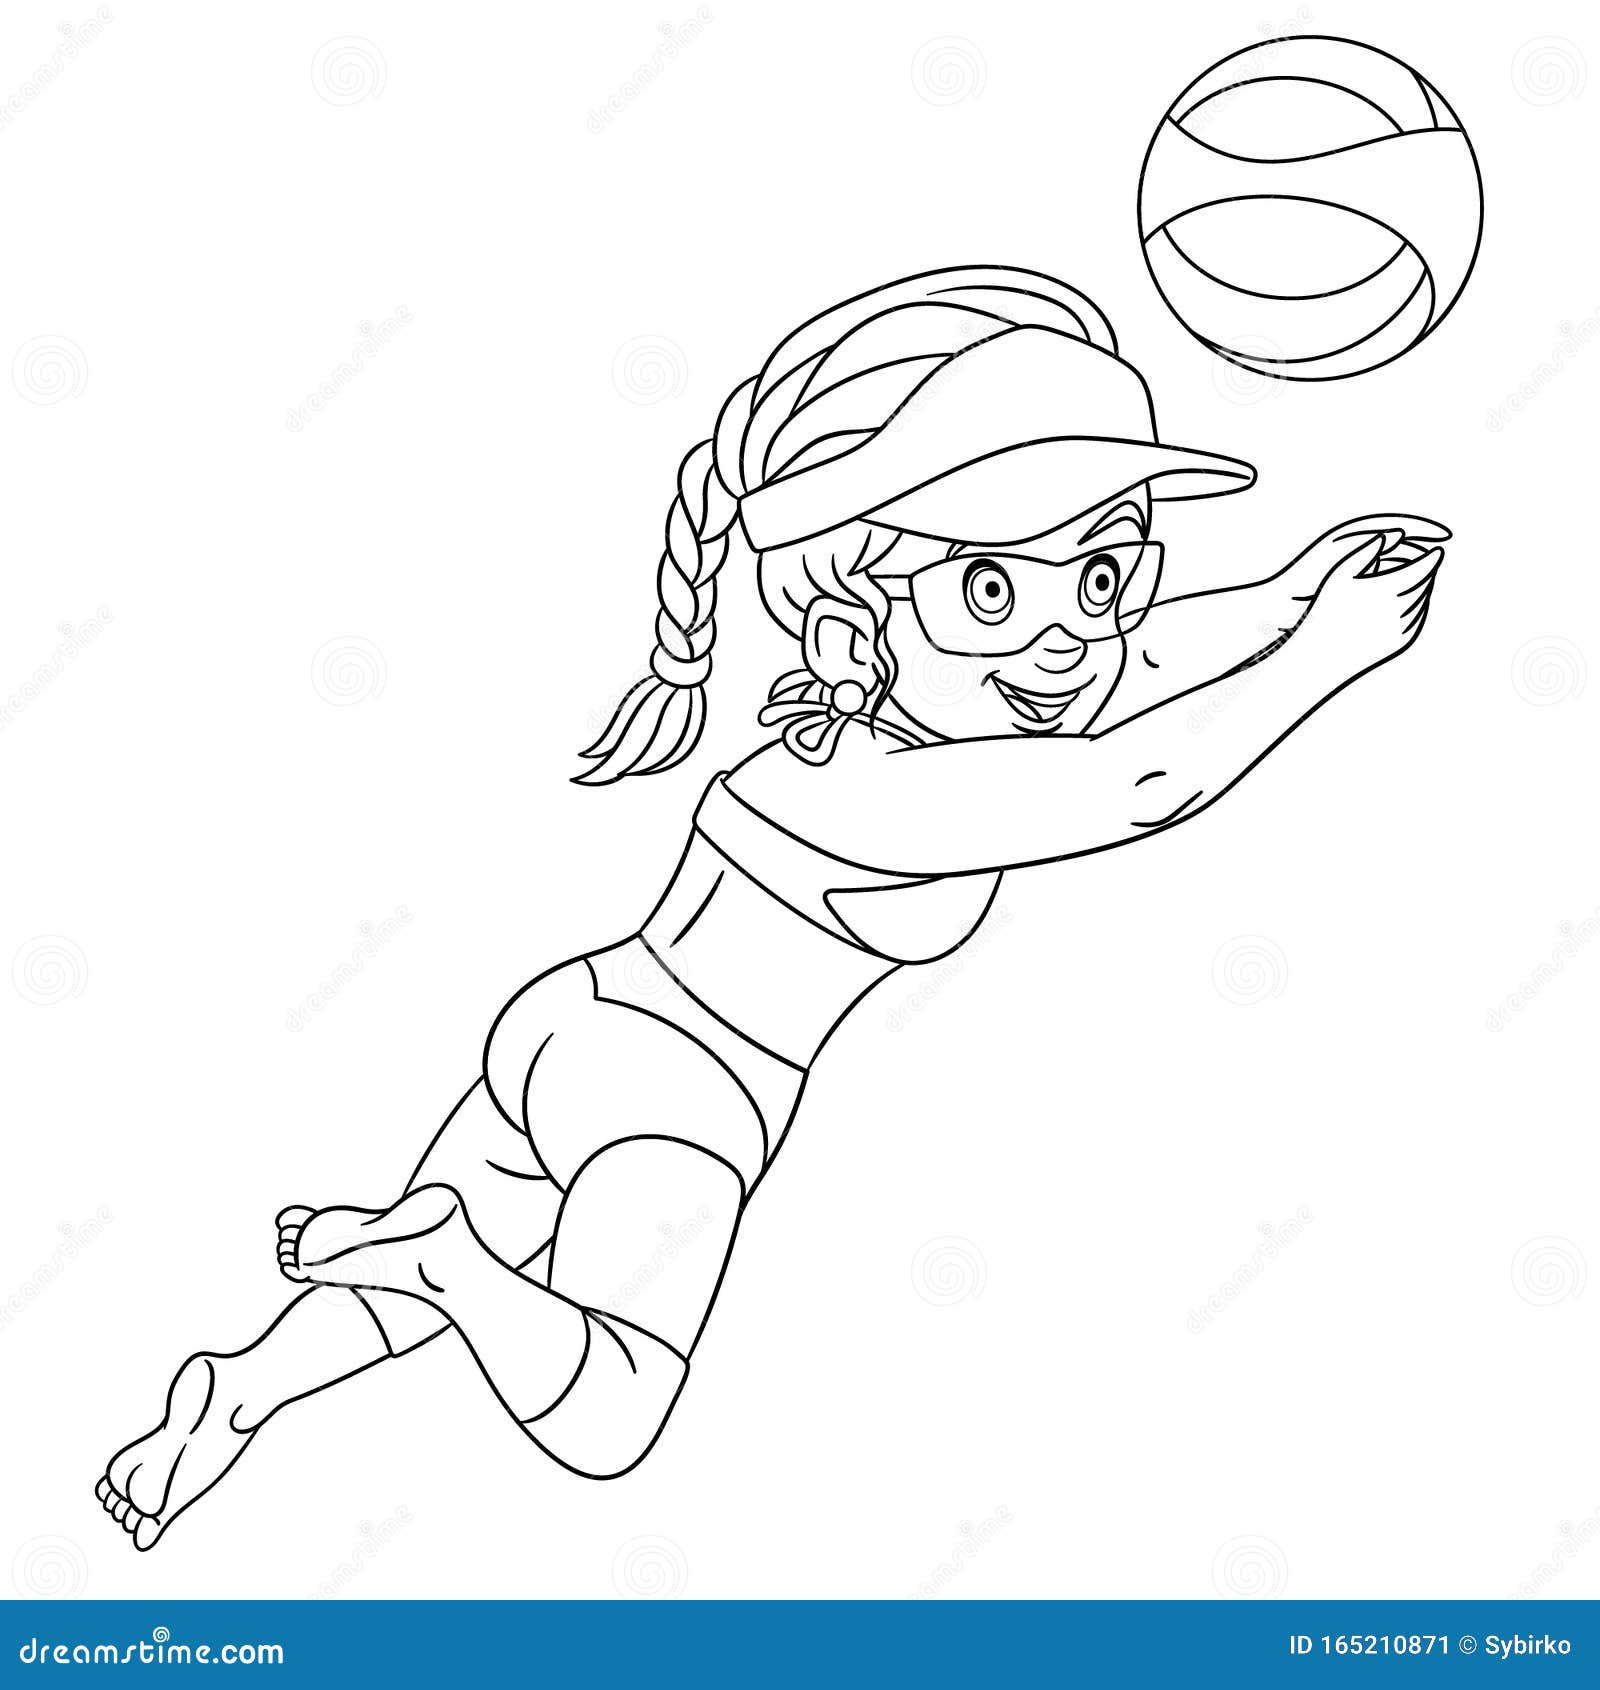 Coloring page with girl playing volleyball stock vector